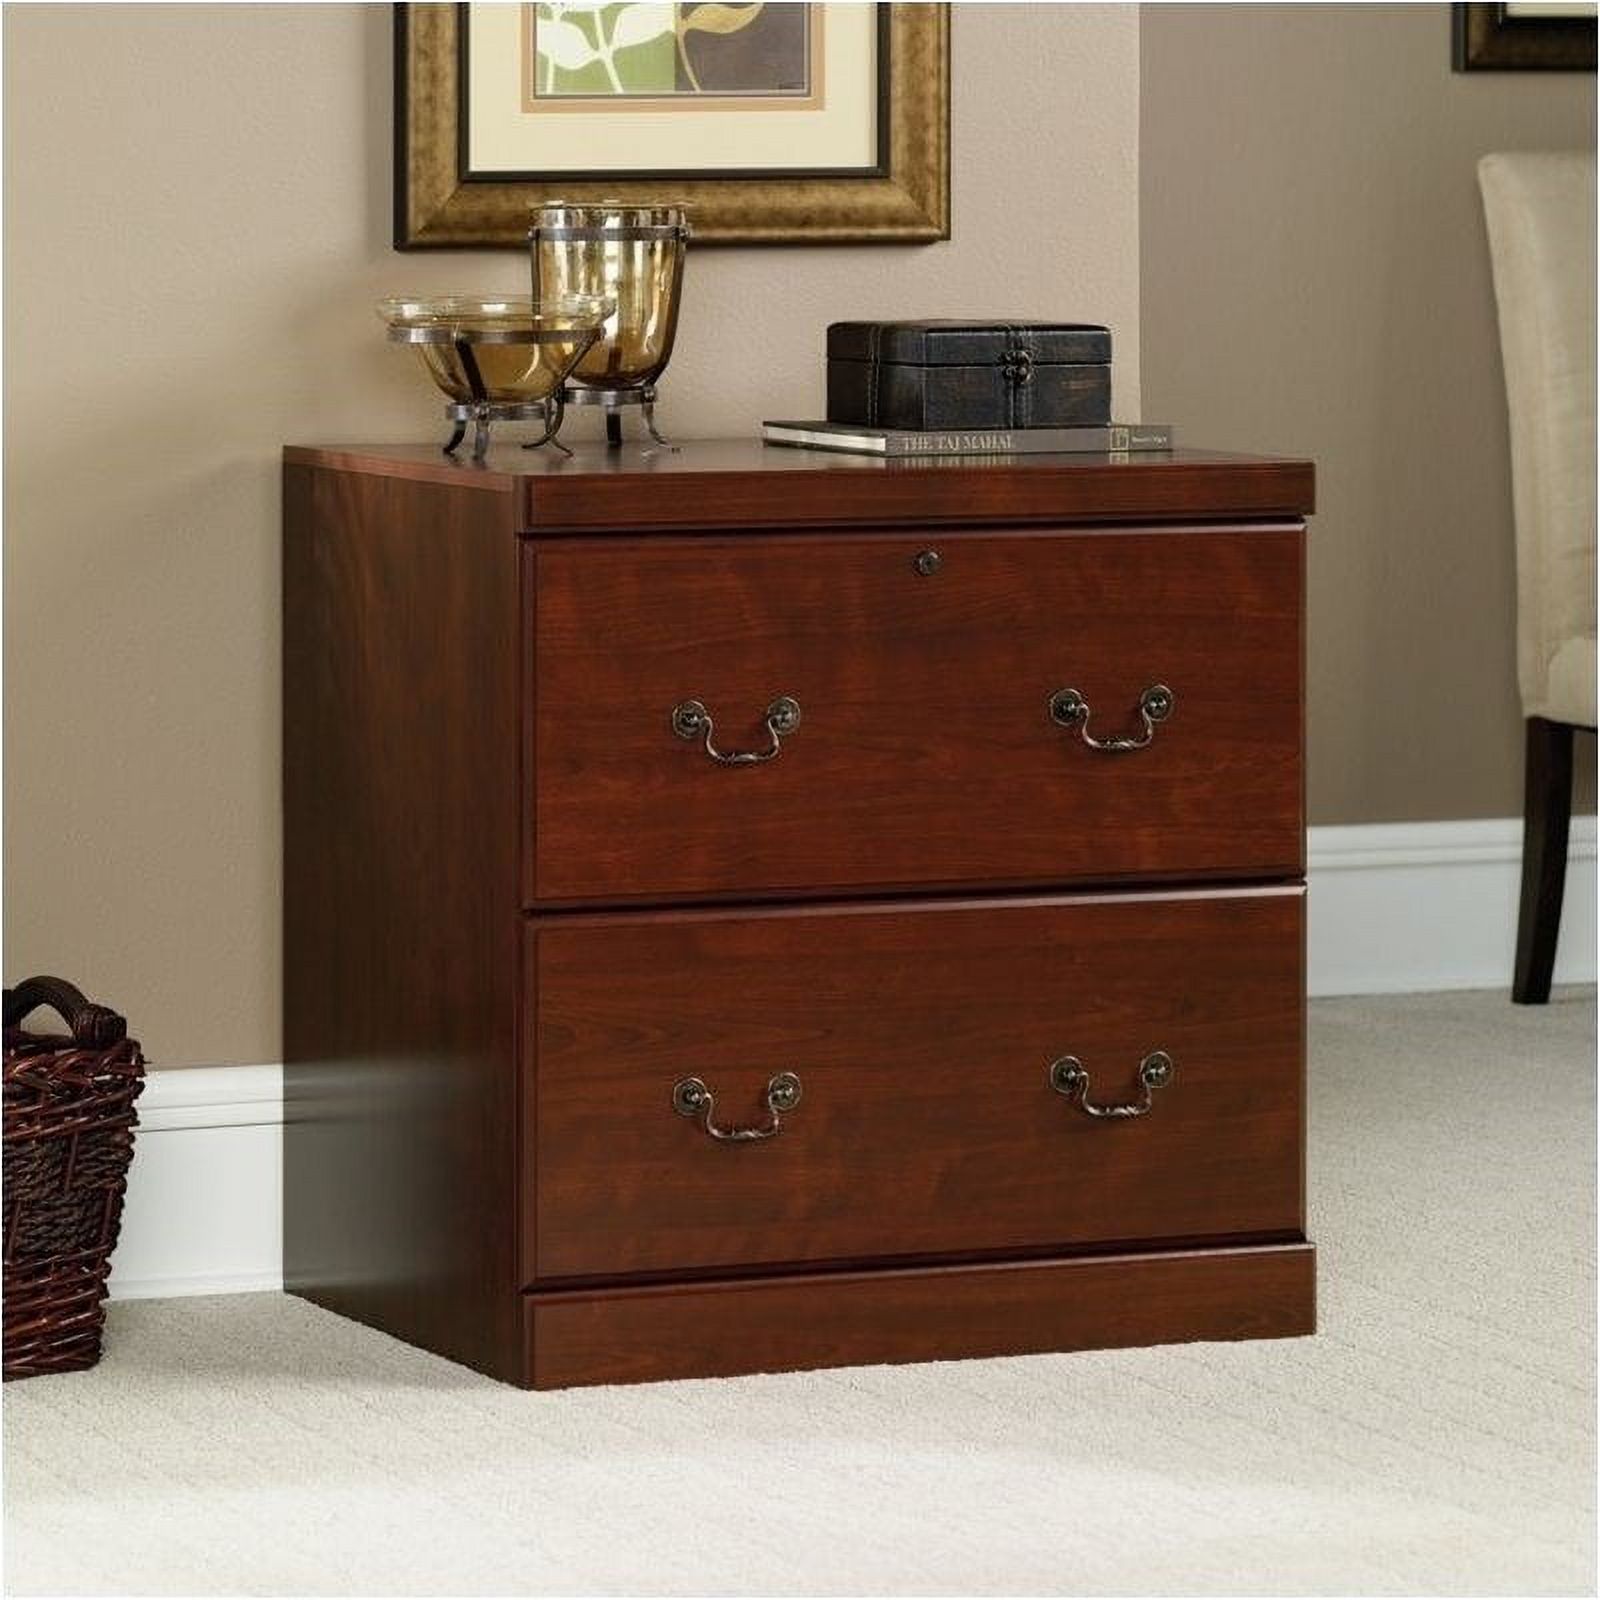 Pemberly Row Traditional Wood 2 Drawer Lateral File Cabinet in Classic Cherry - image 3 of 3